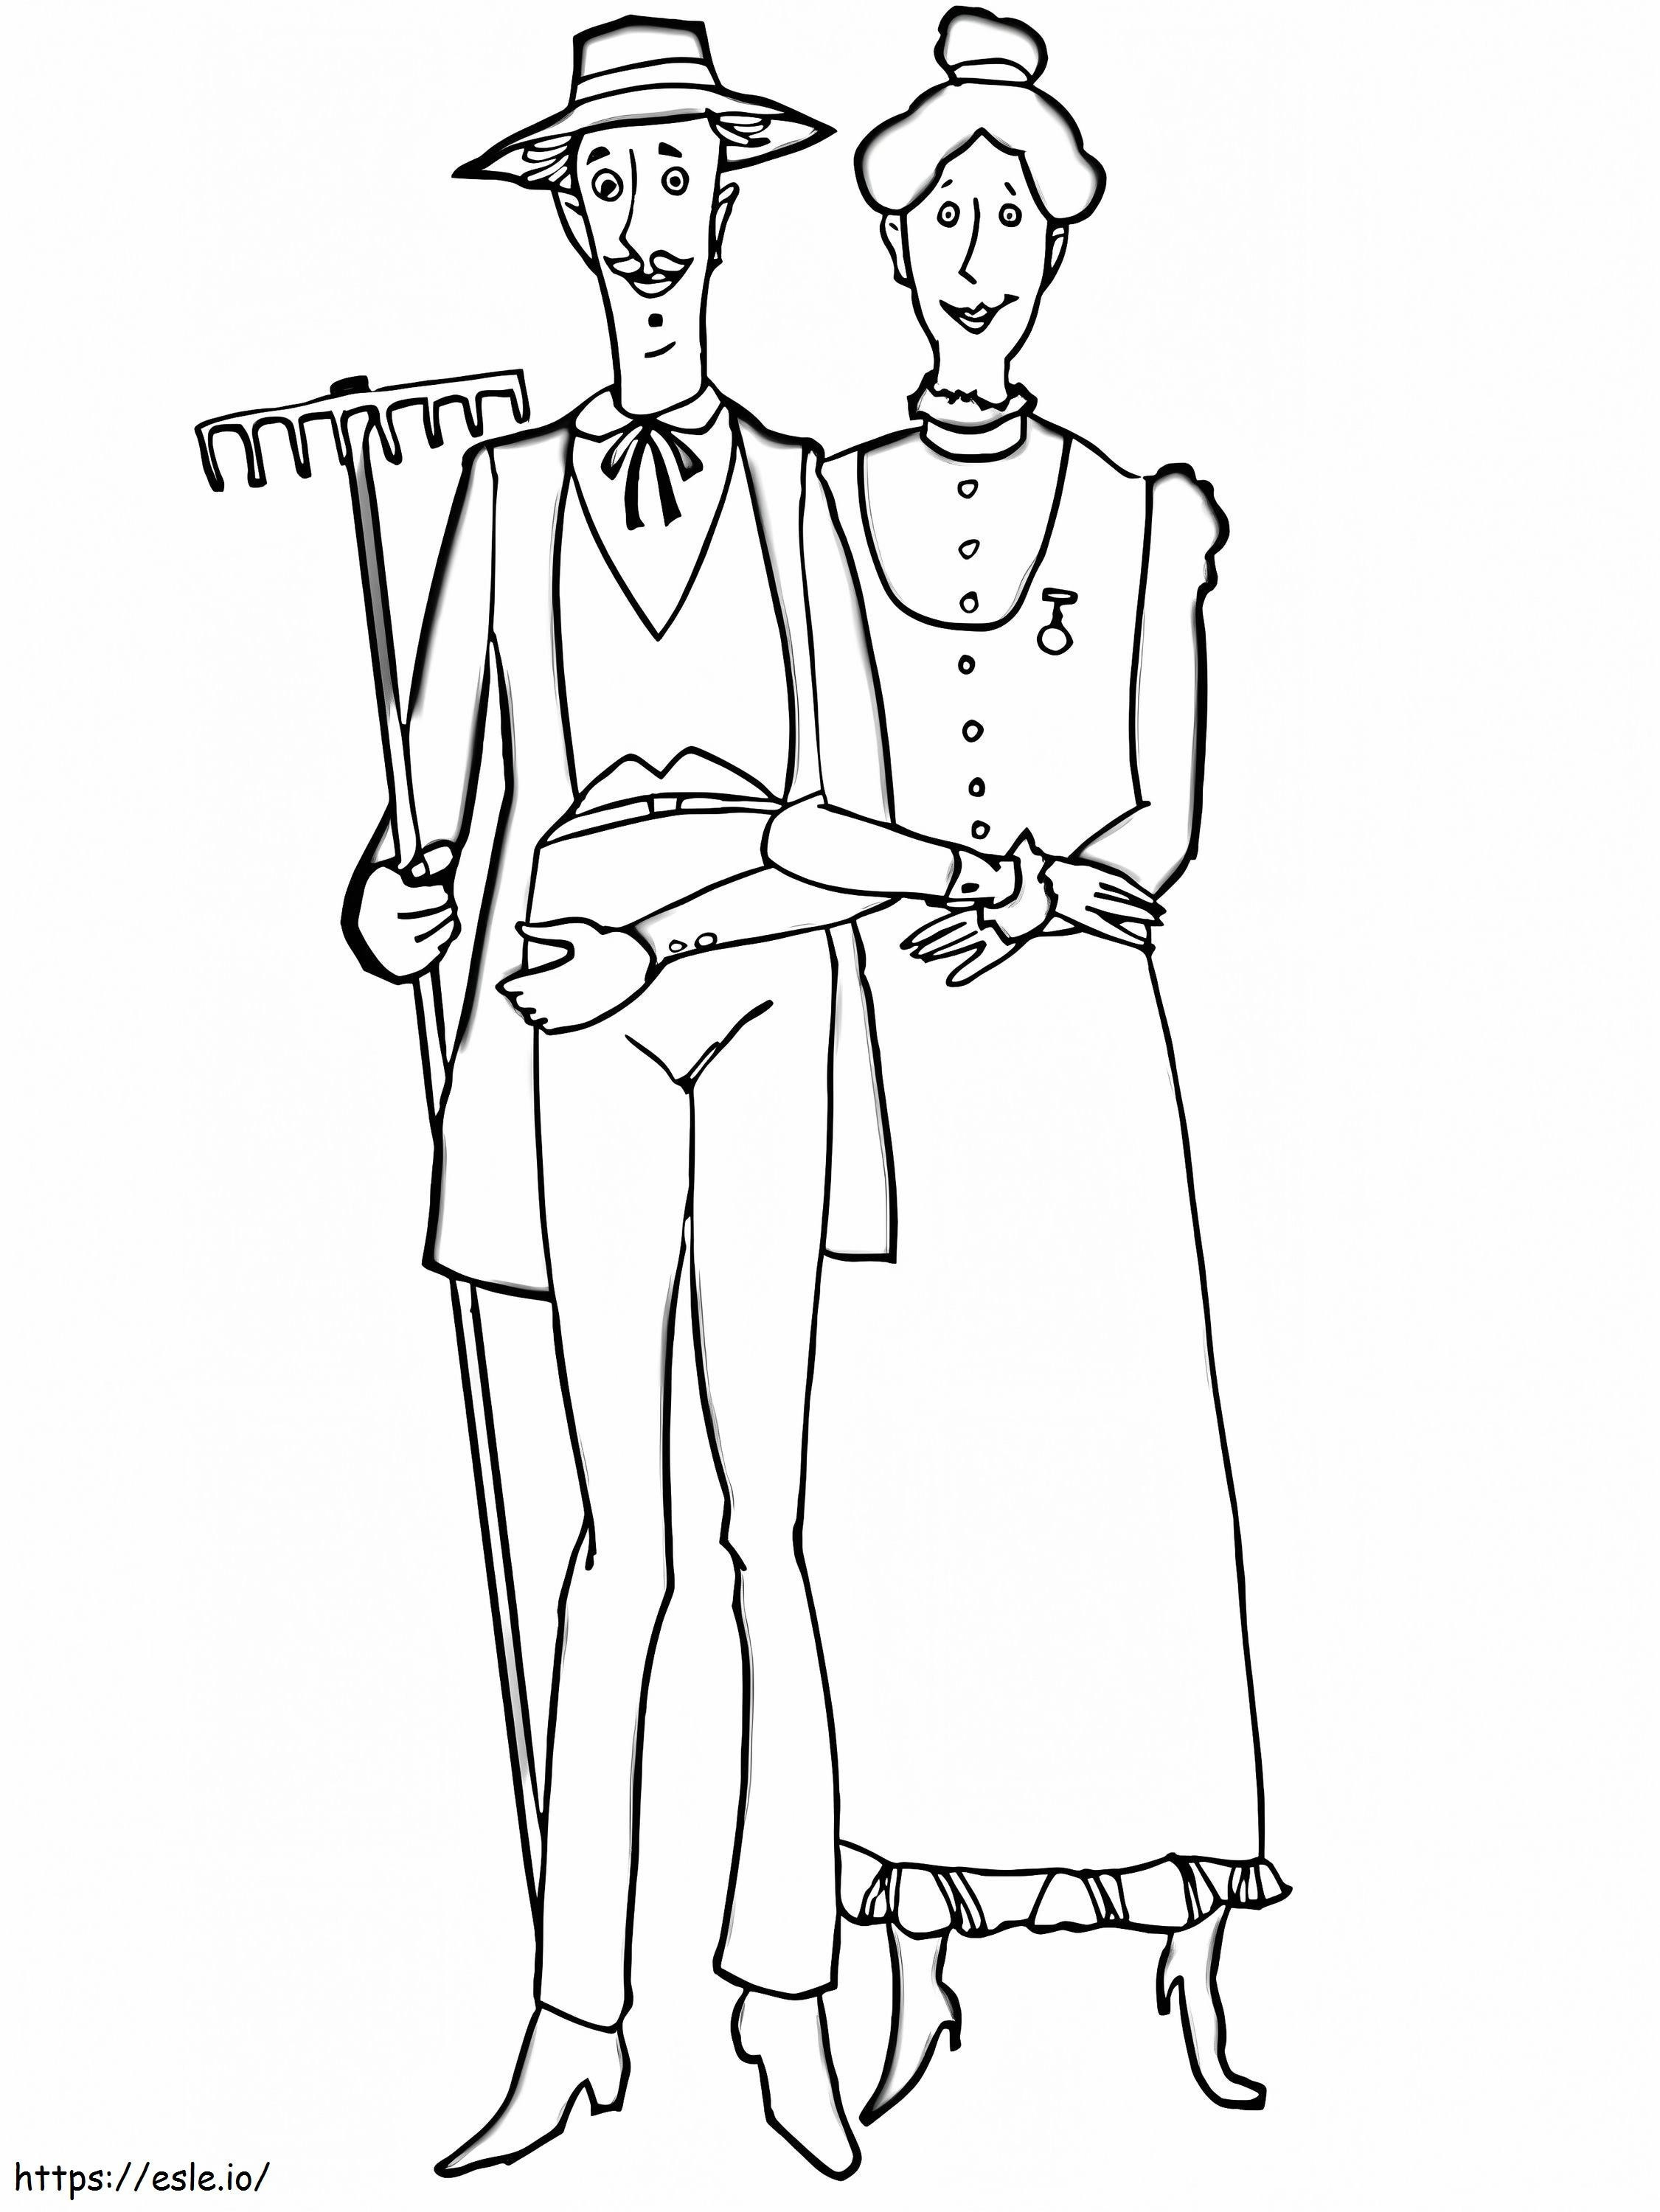 Family Of Farmers coloring page